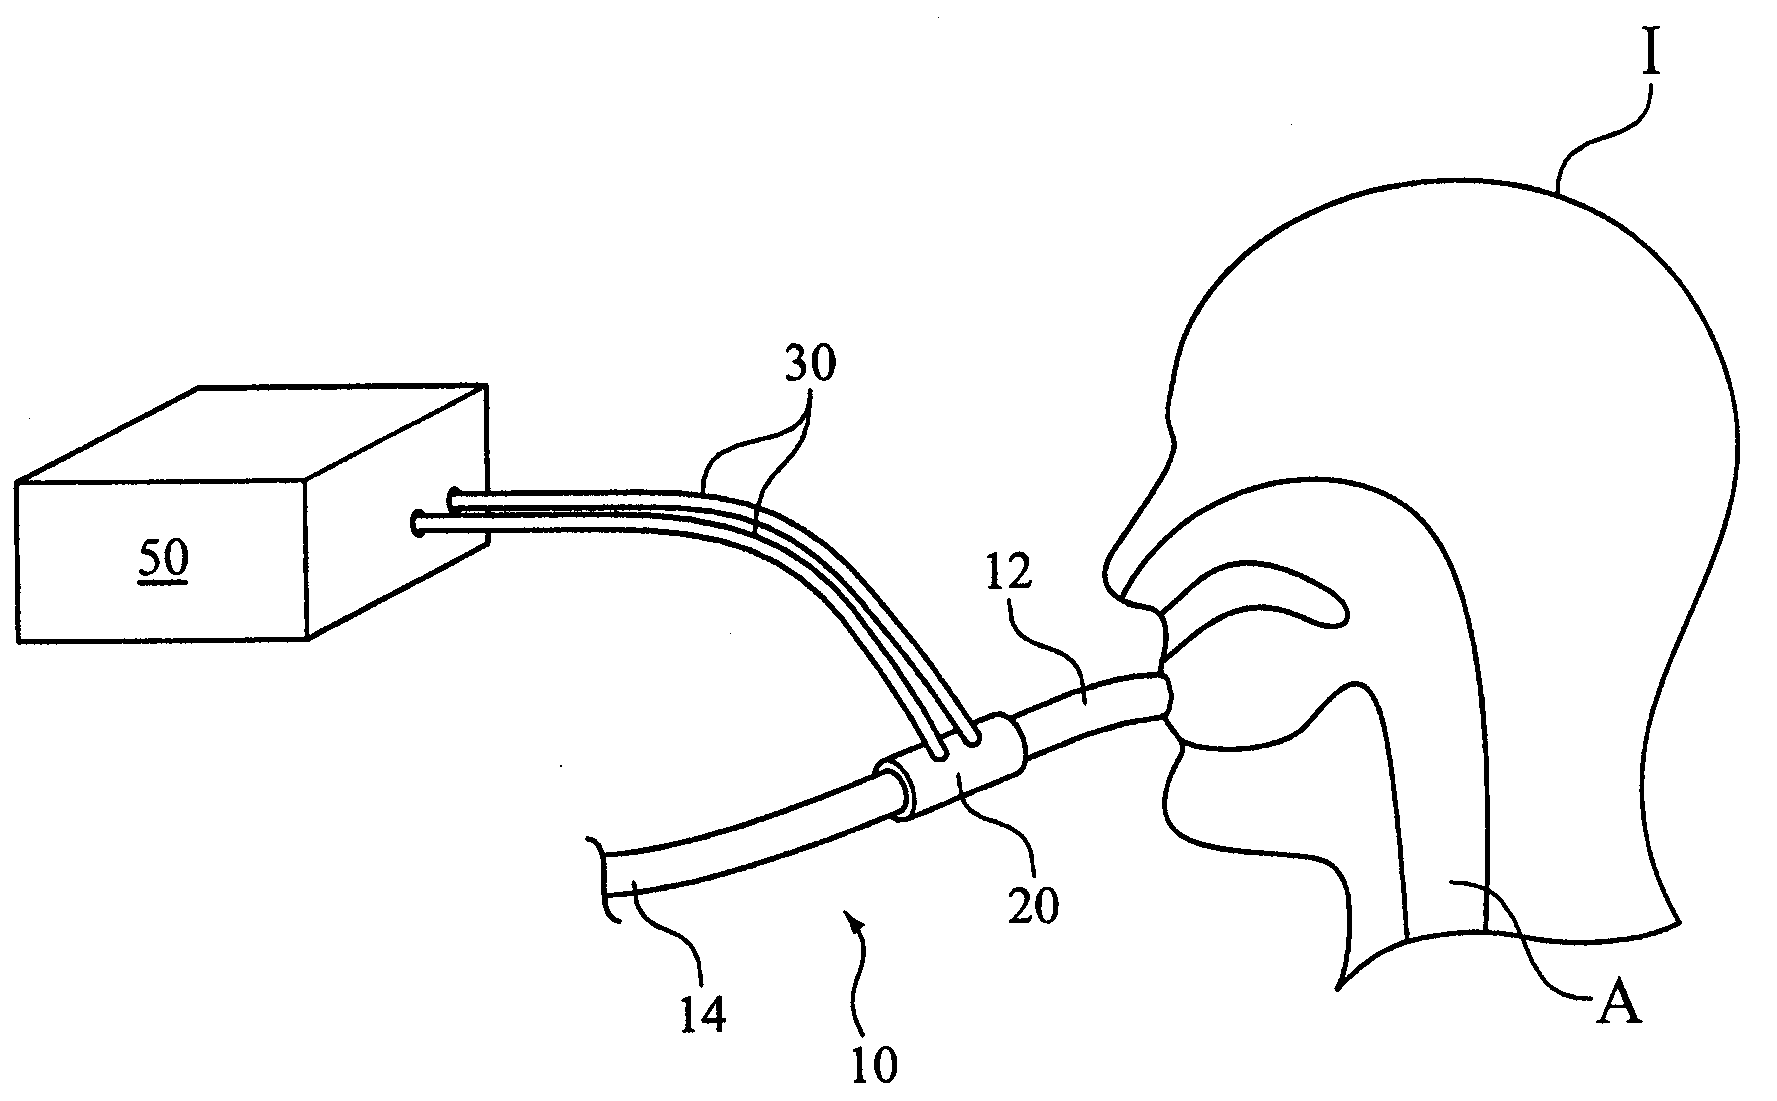 Electro-Pneumatic Assembly for Use in a Respiratory Measurement System